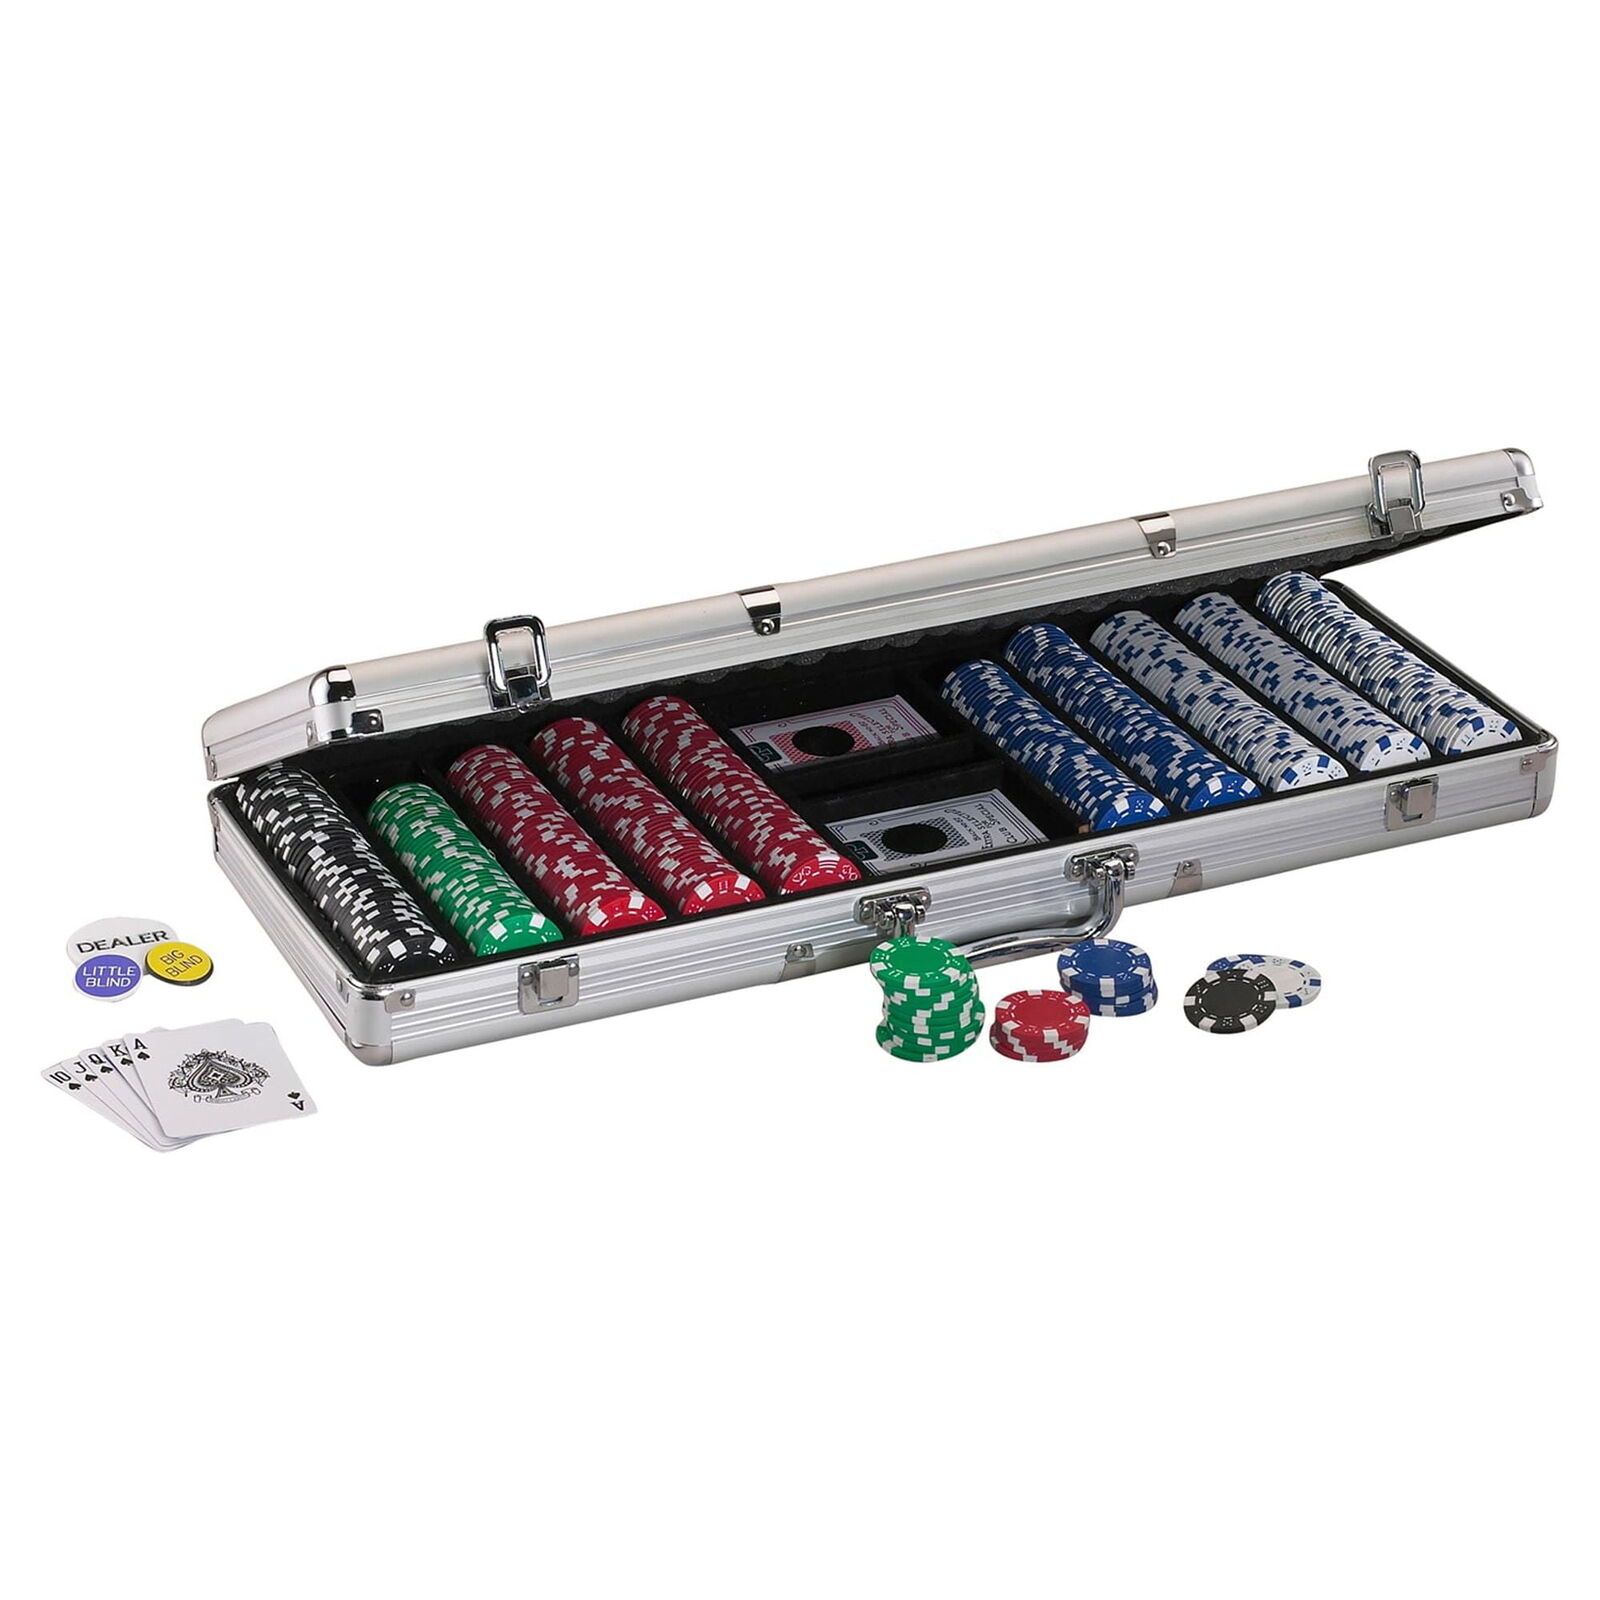 Aluminum Poker Chip Carrying Case, Fits 500 Chips (Not Included)